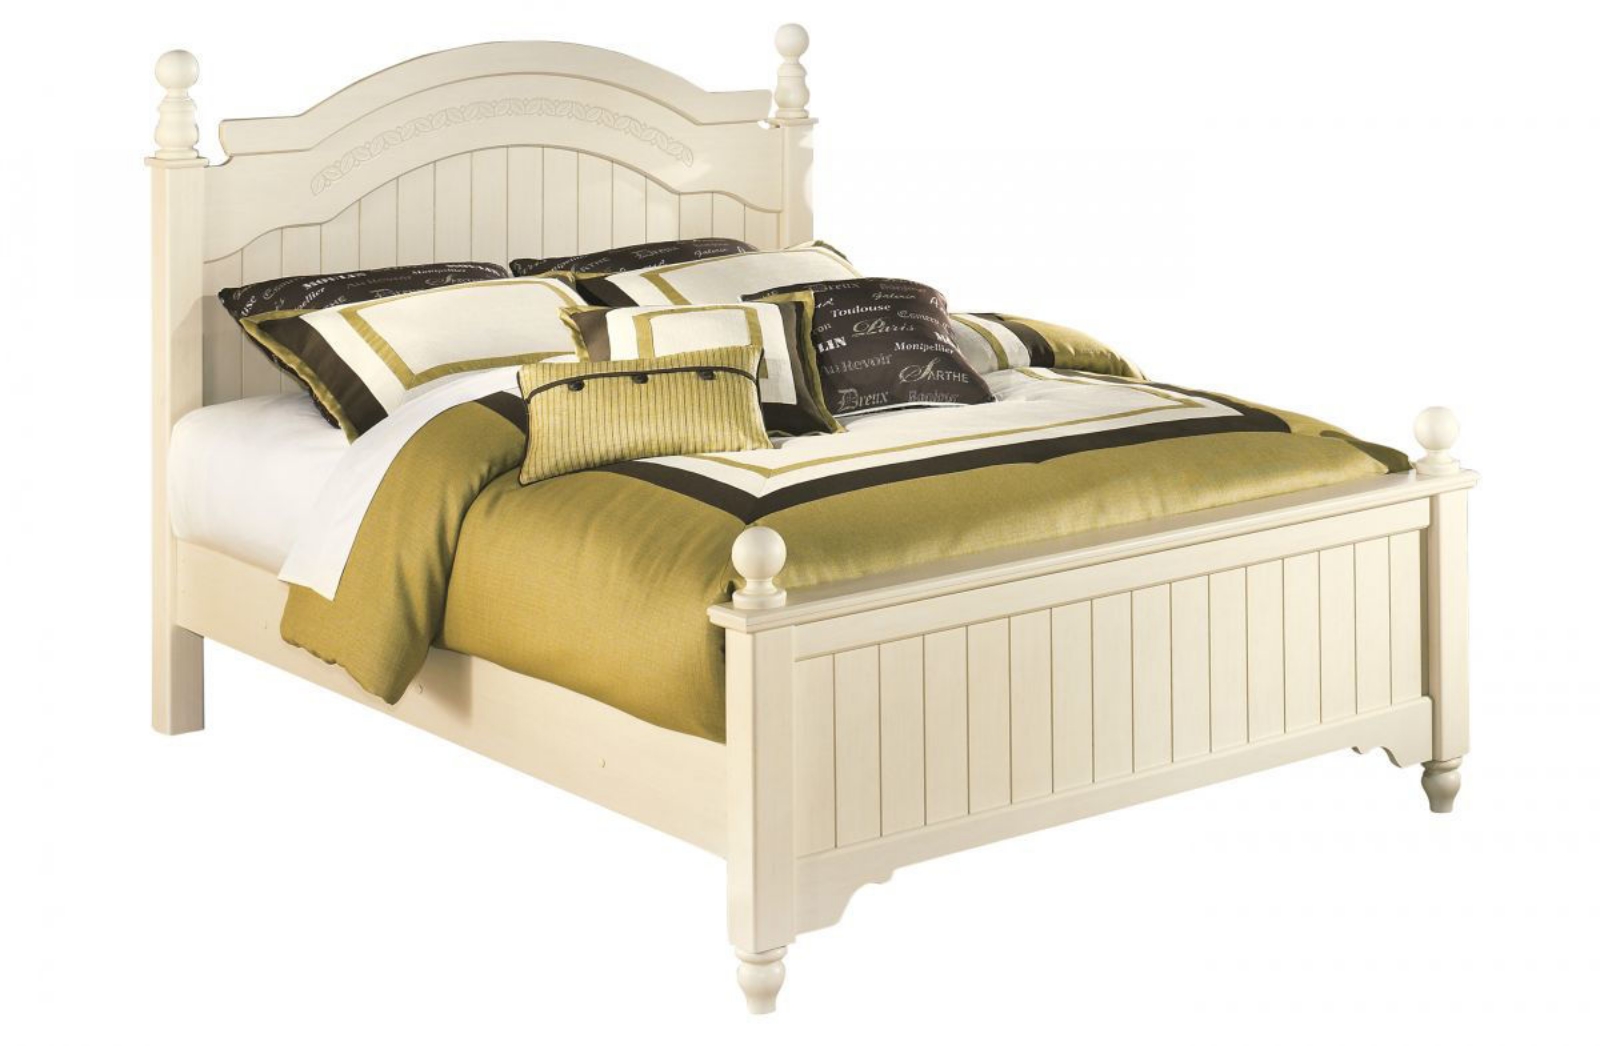 Picture of Cottage Retreat Queen Size Bed